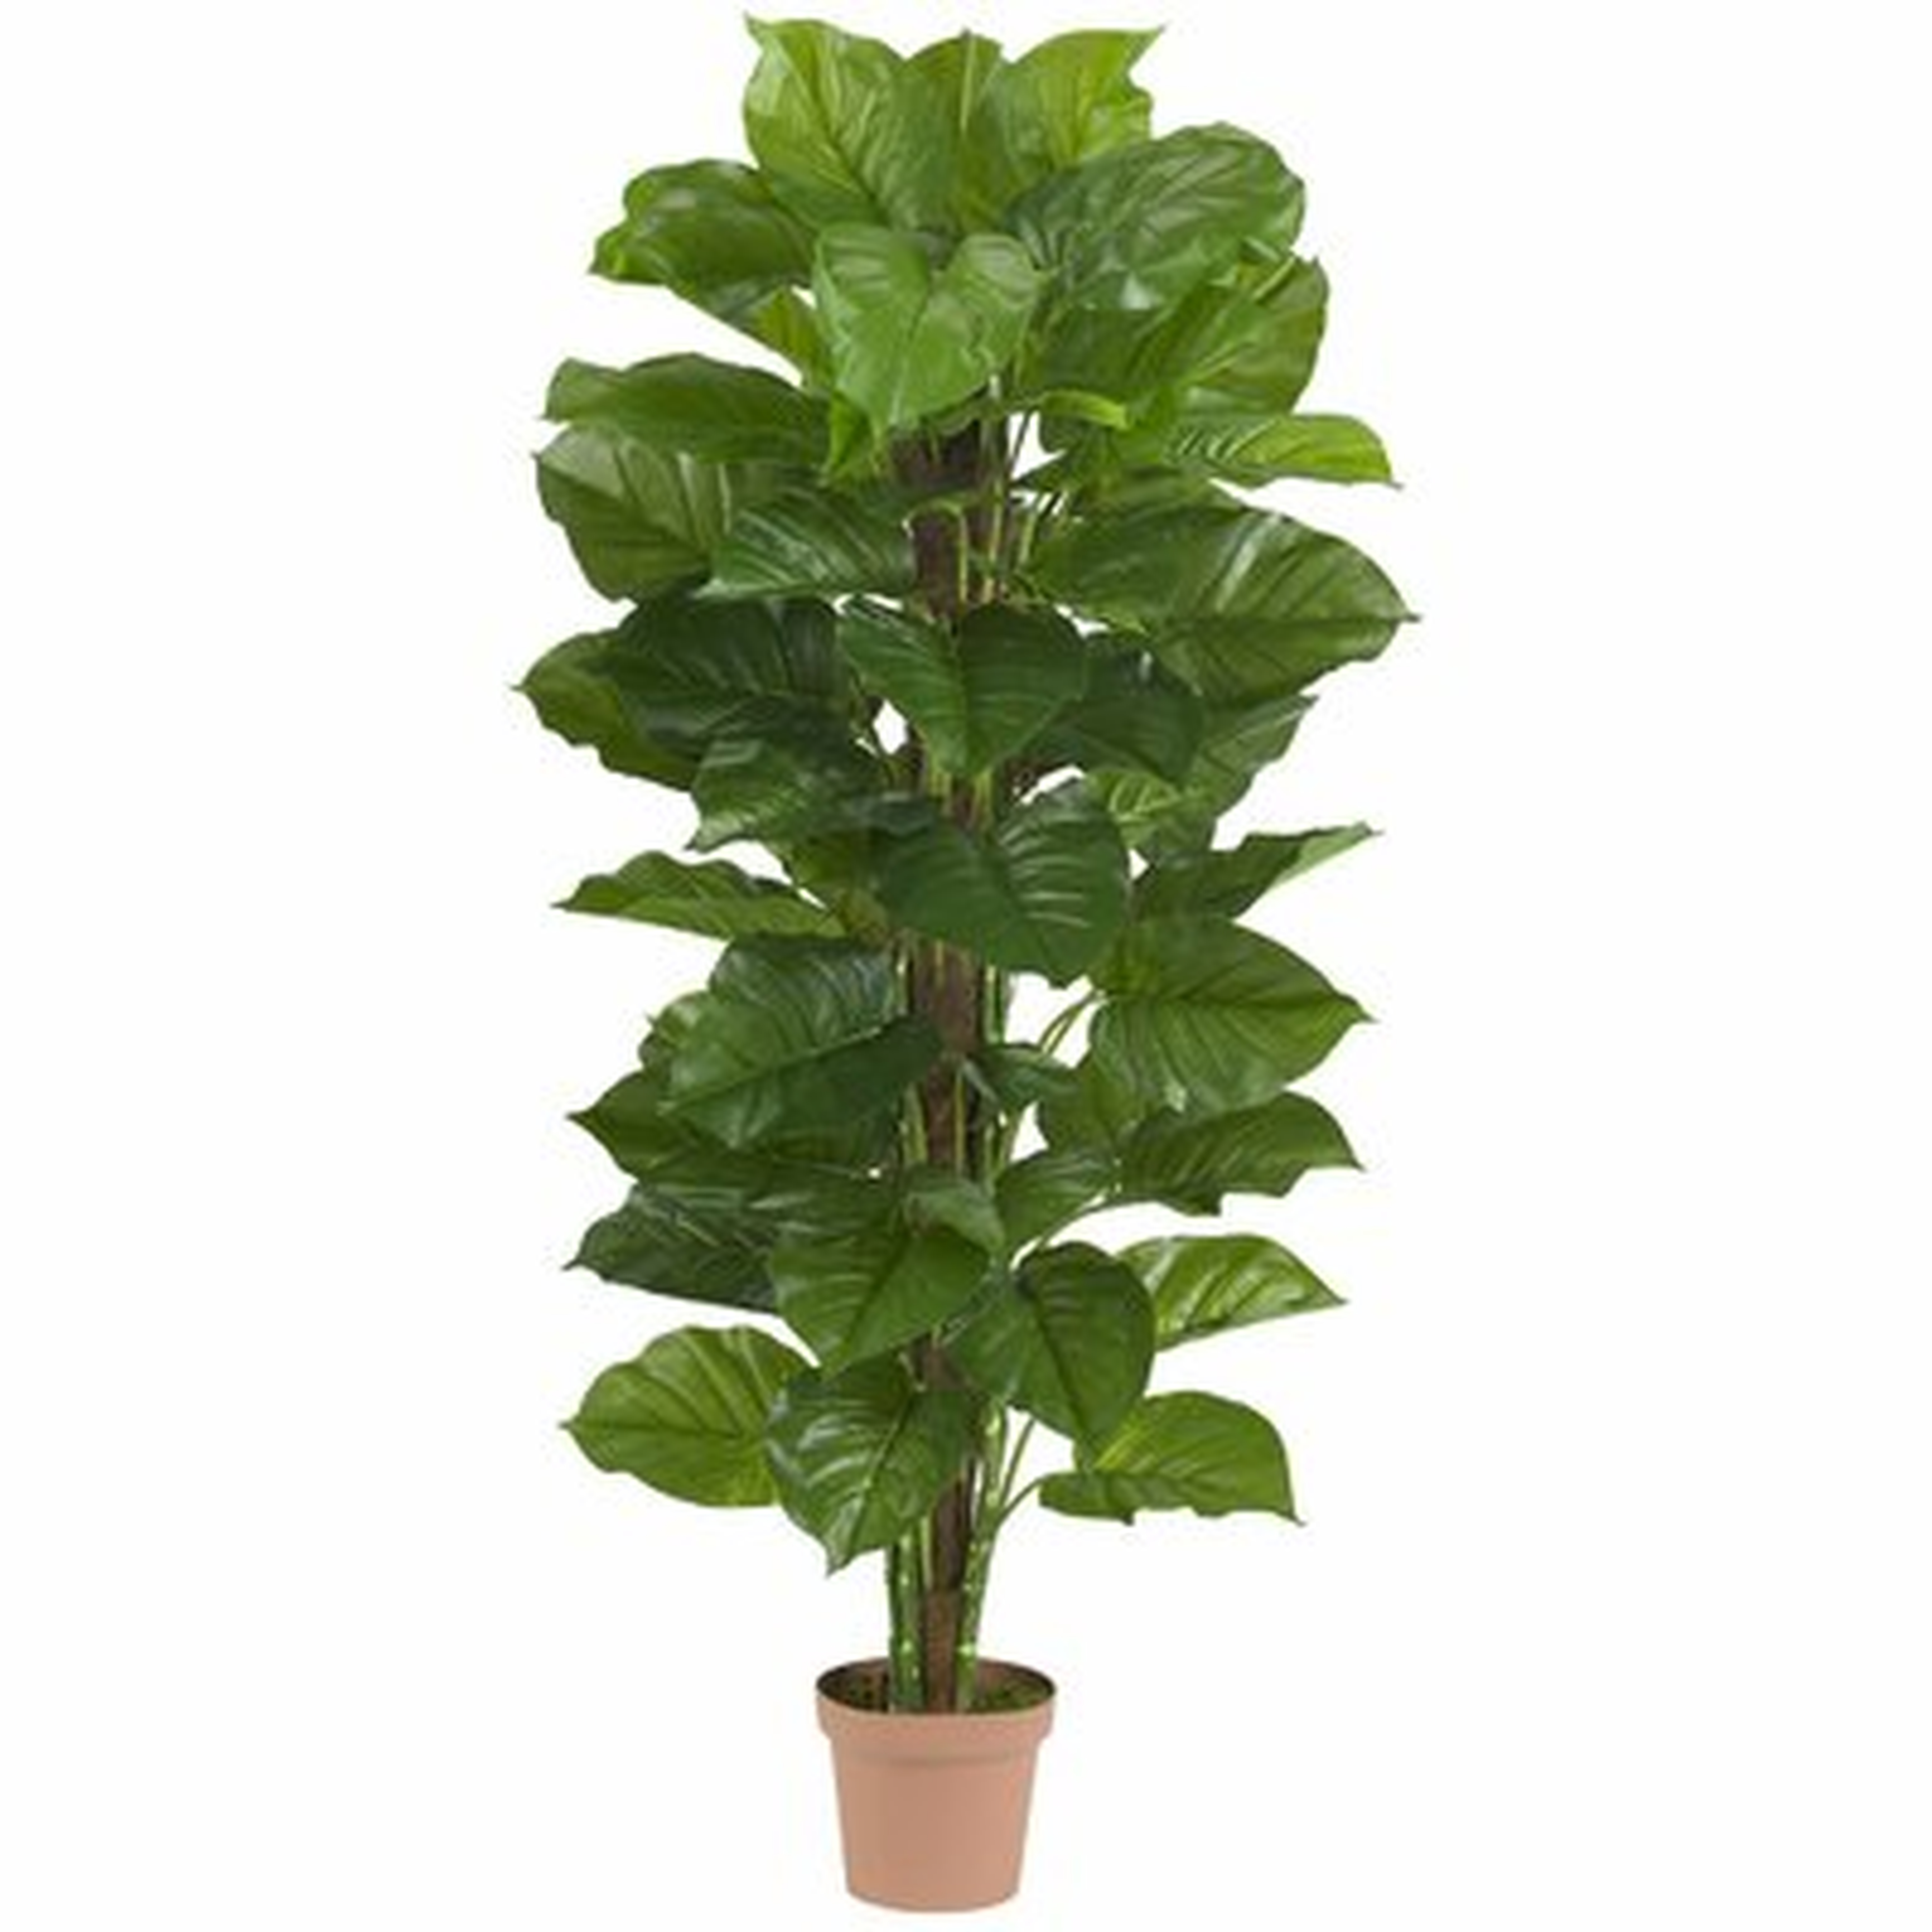 Philodendron Foliage Tree in Pot - Wayfair